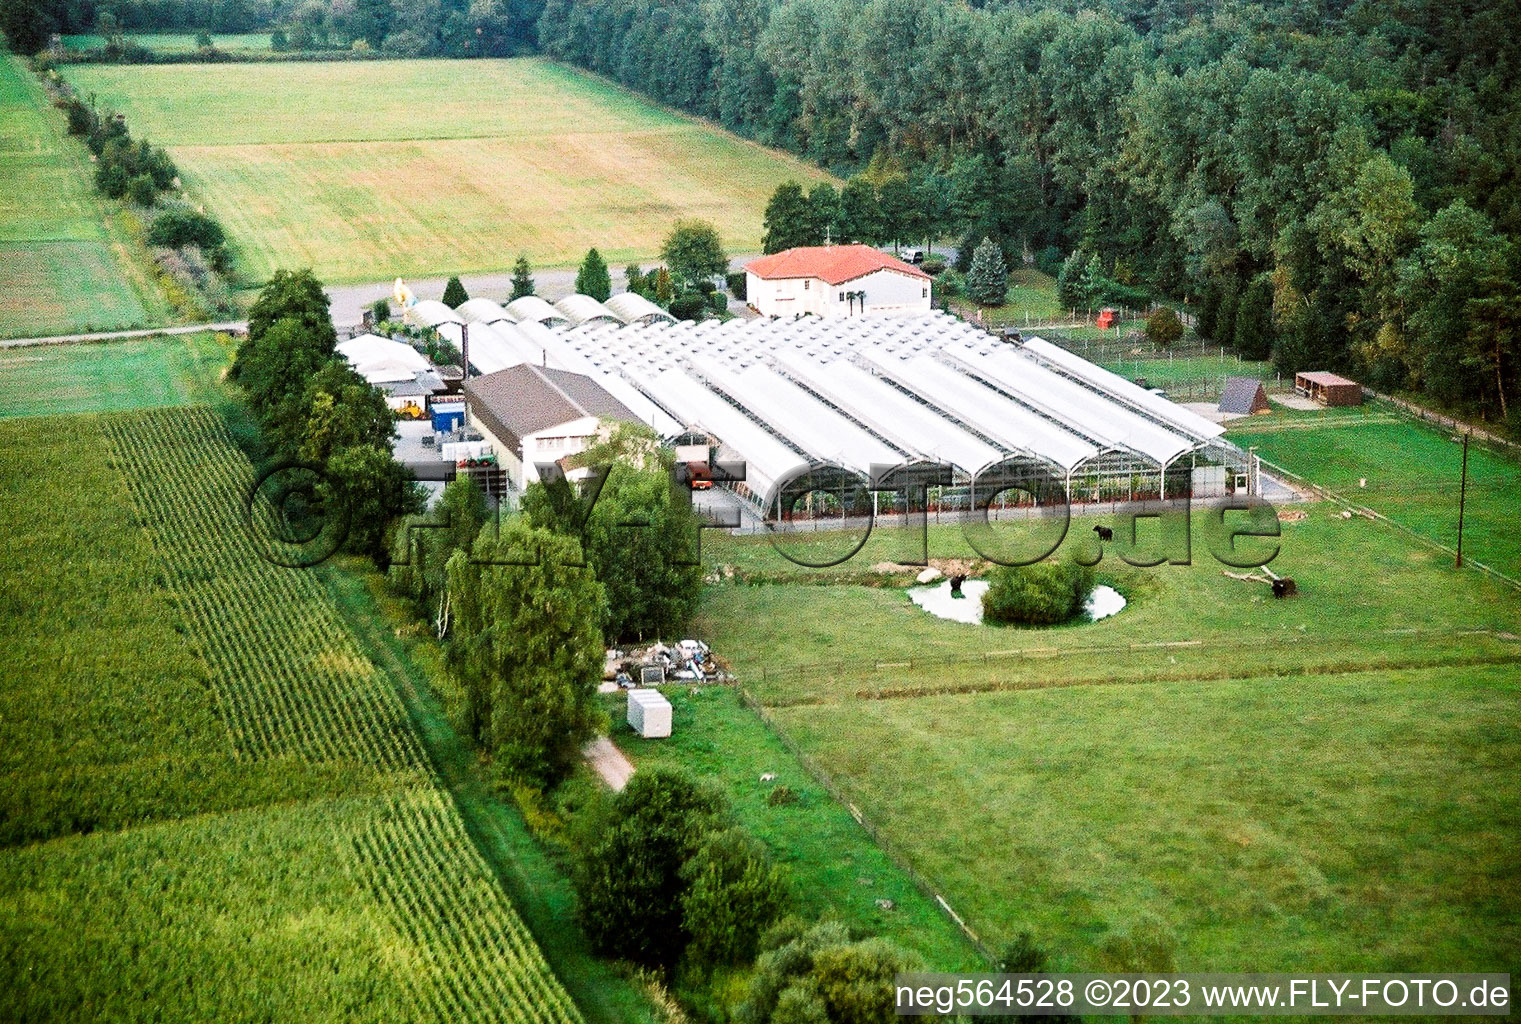 Aerial view of Nursery in Freckenfeld in the state Rhineland-Palatinate, Germany